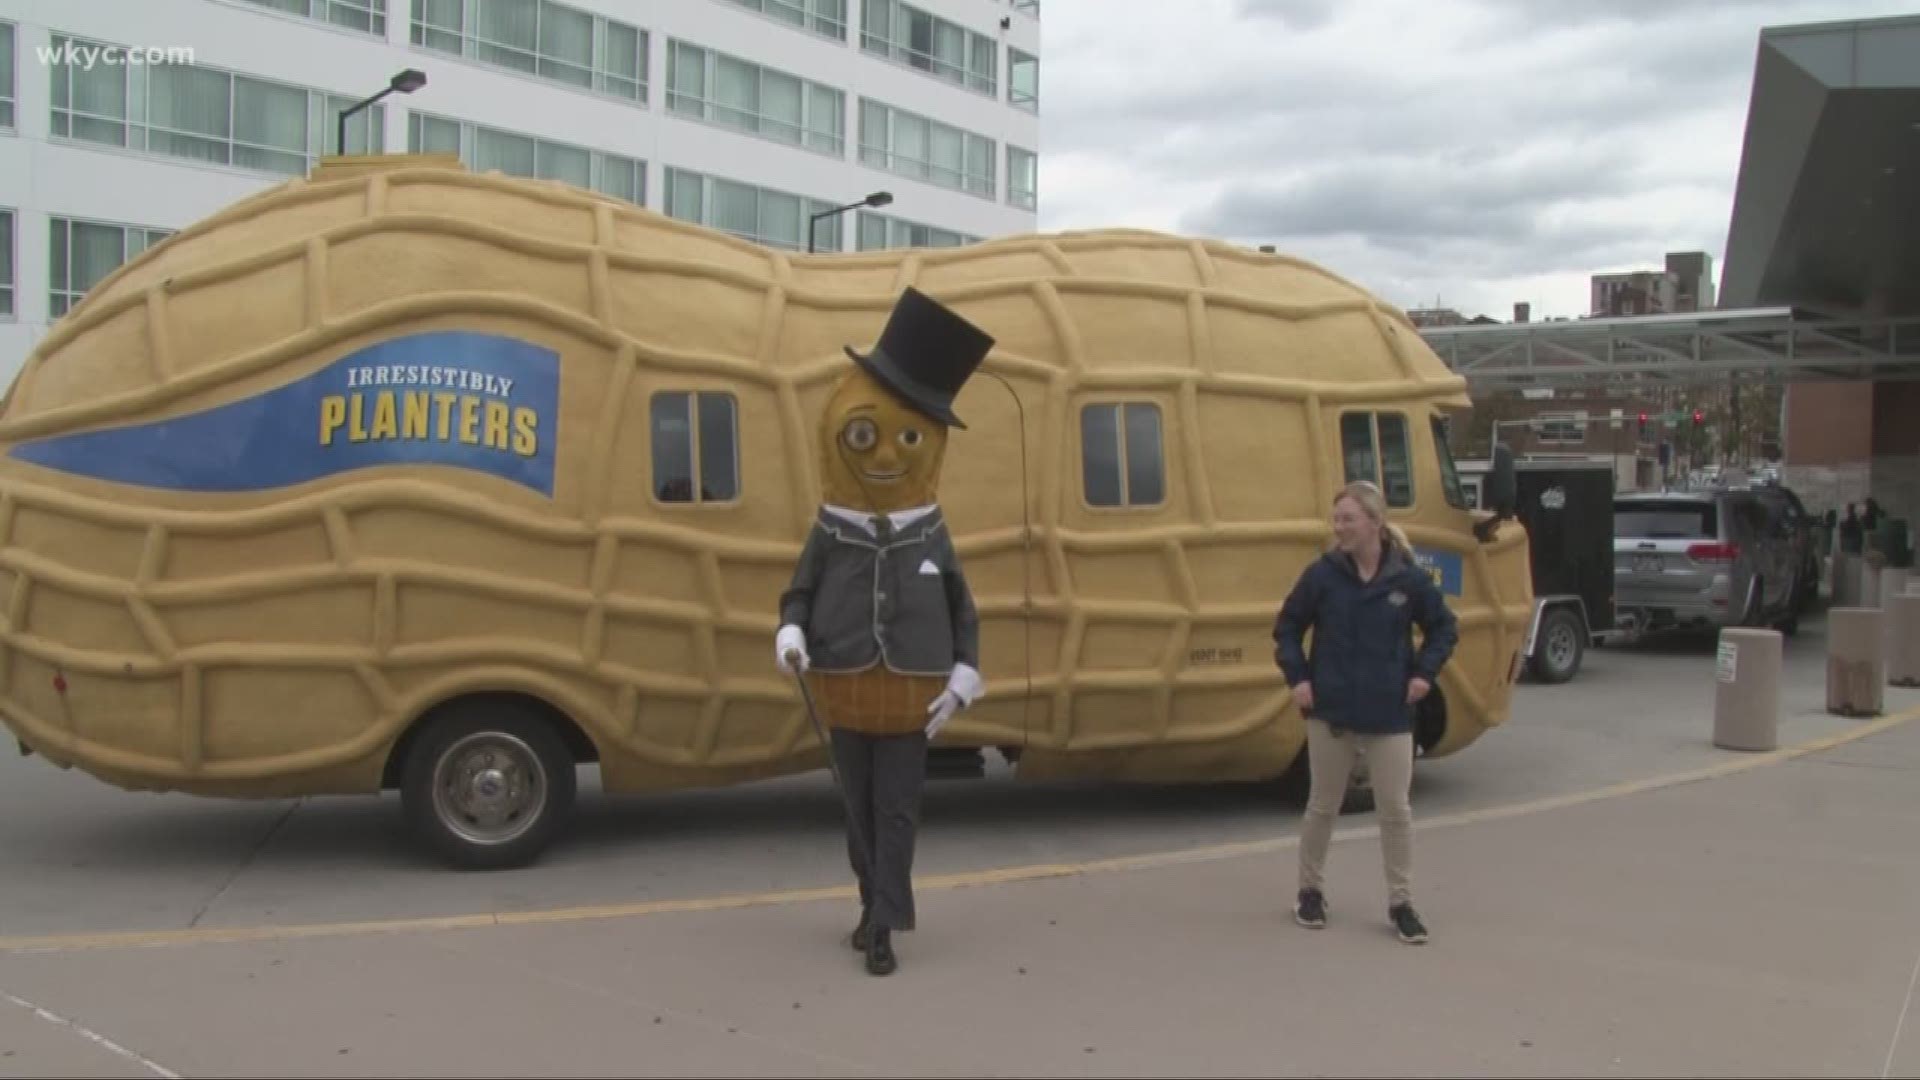 Aug. 29, 2018: The company's giant peanut on wheels will be in Northeast Ohio for several stops around the area.